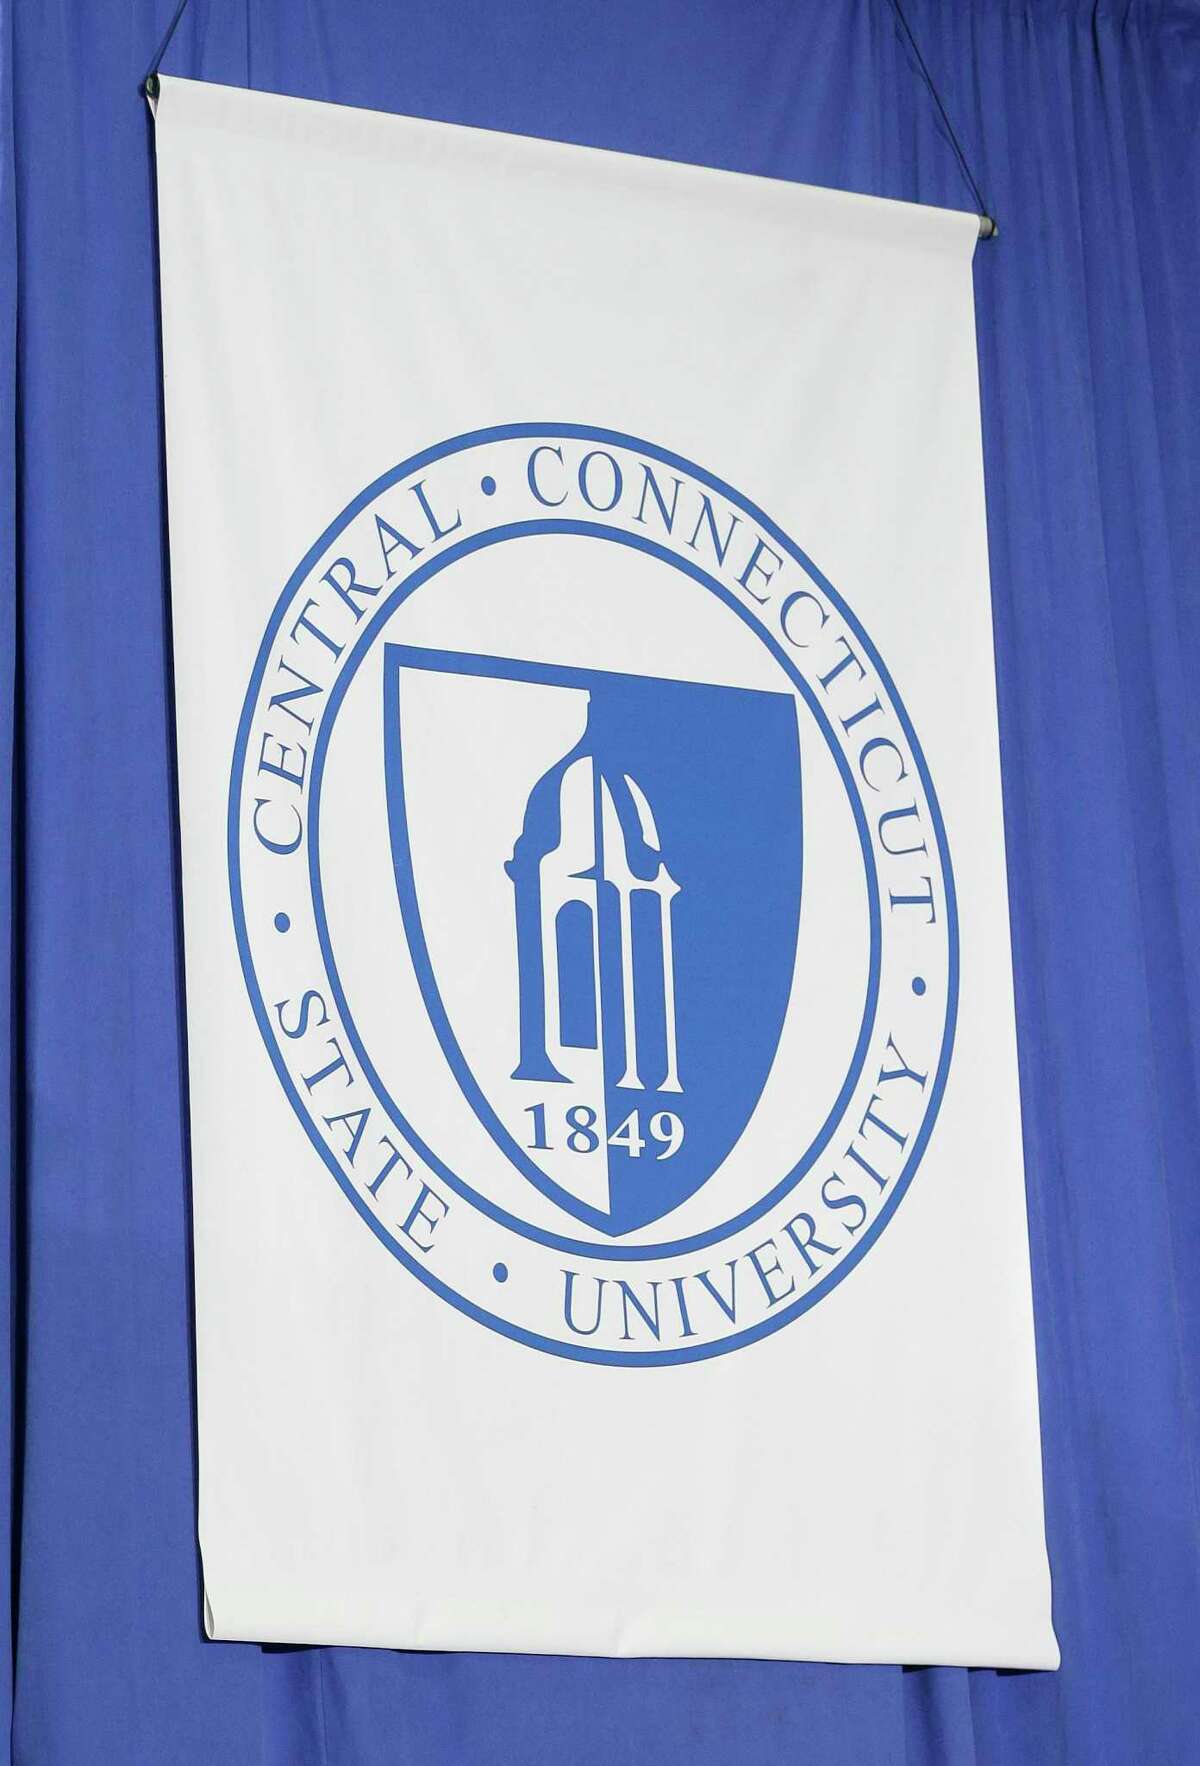 Central Connecticut State University in New Britain